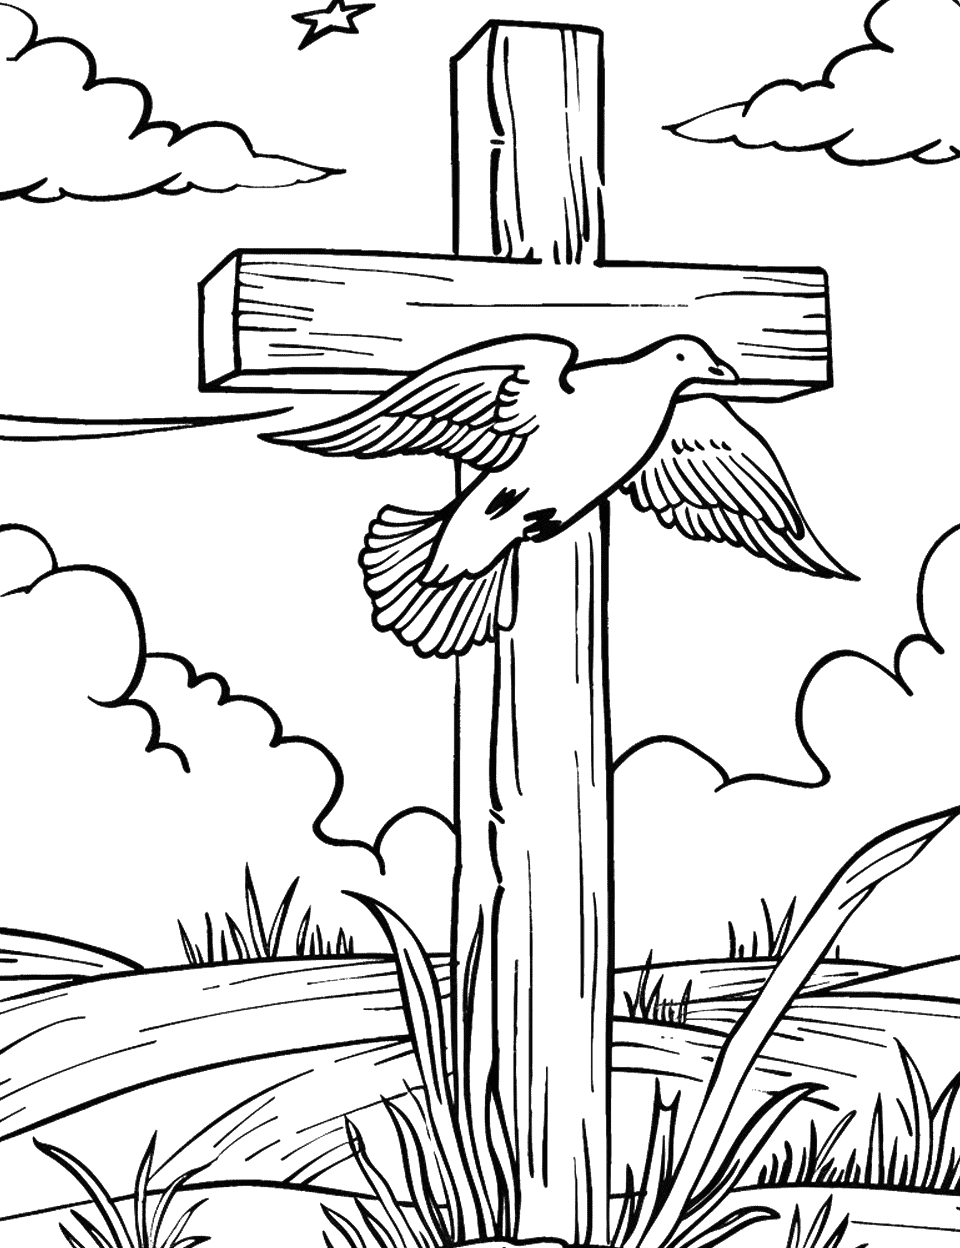 Dove Flying Near a Cross Coloring Page - A single dove flying near a cross.